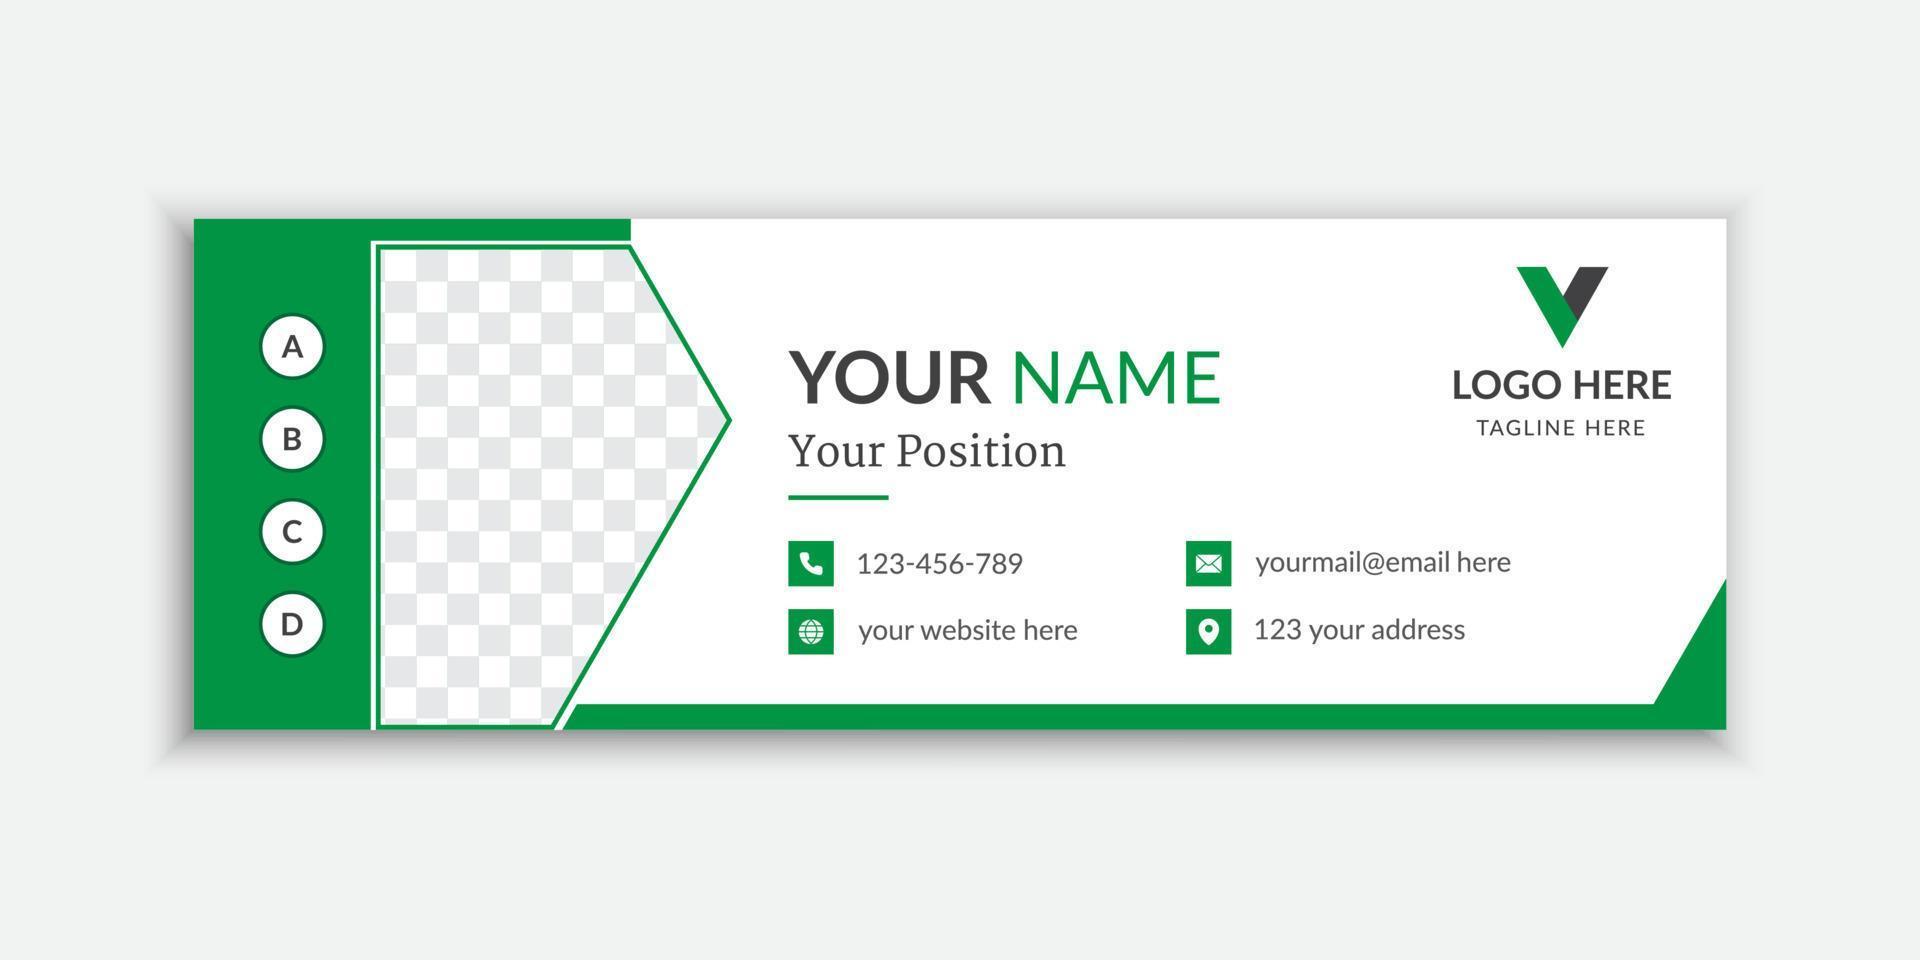 Email Signature or Email Footer Template Design or Mail Layout vector